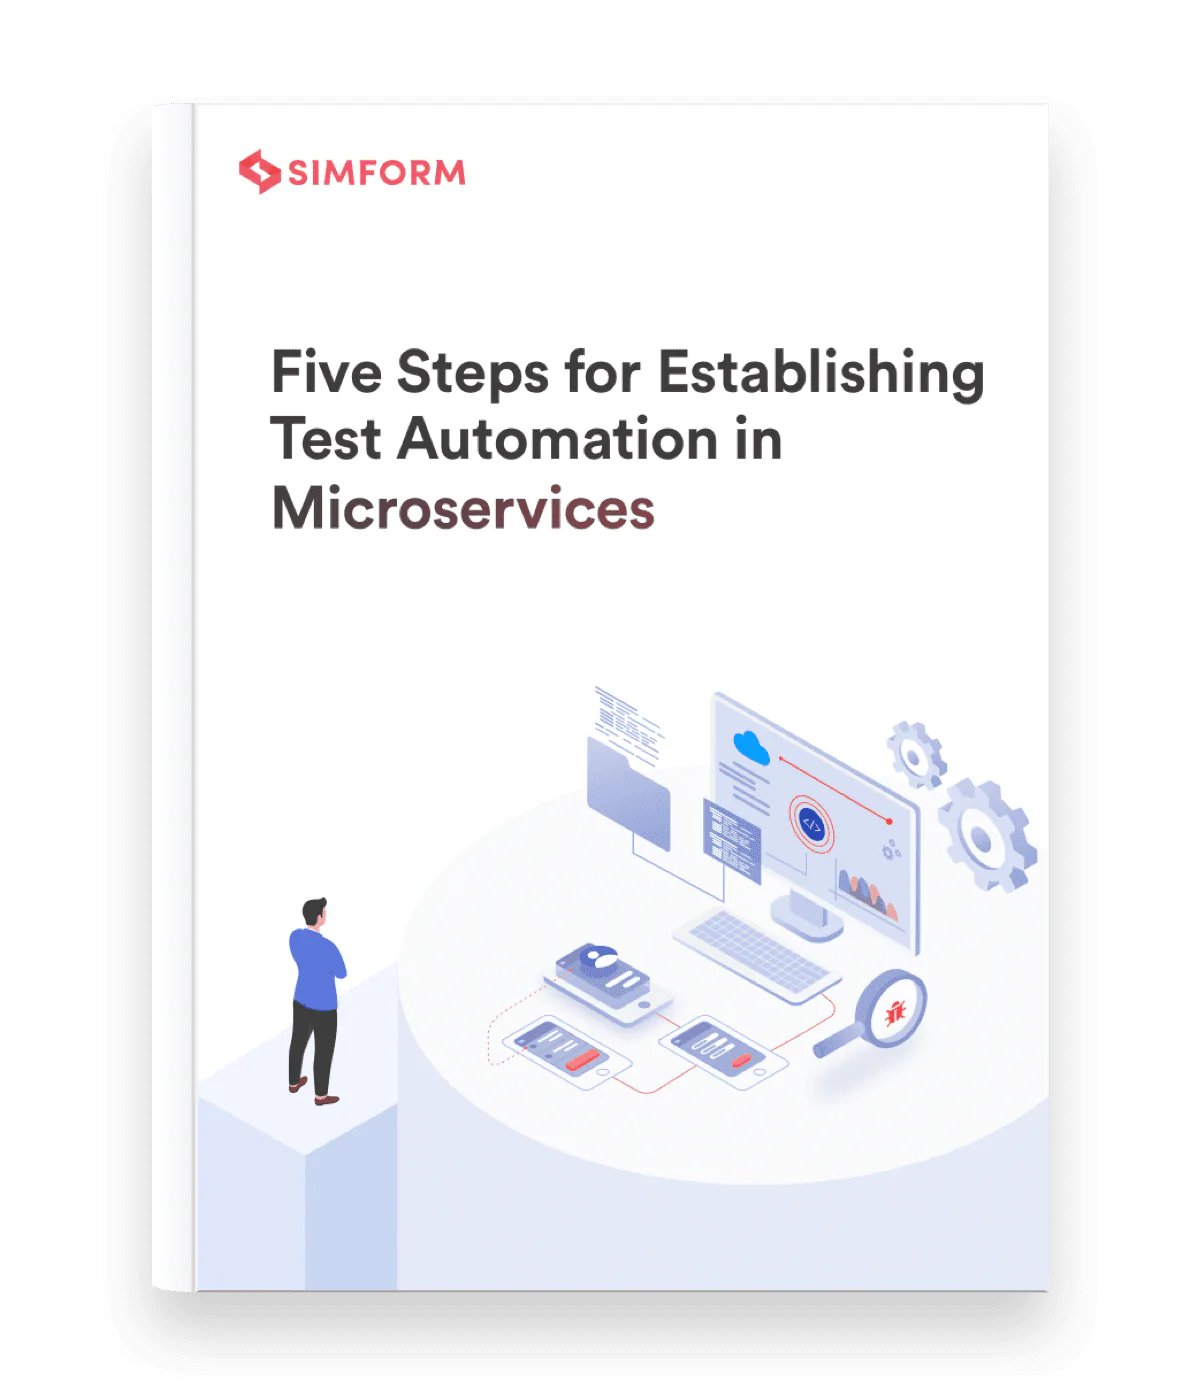 5 Steps for Establishing Test Automation in Microservices